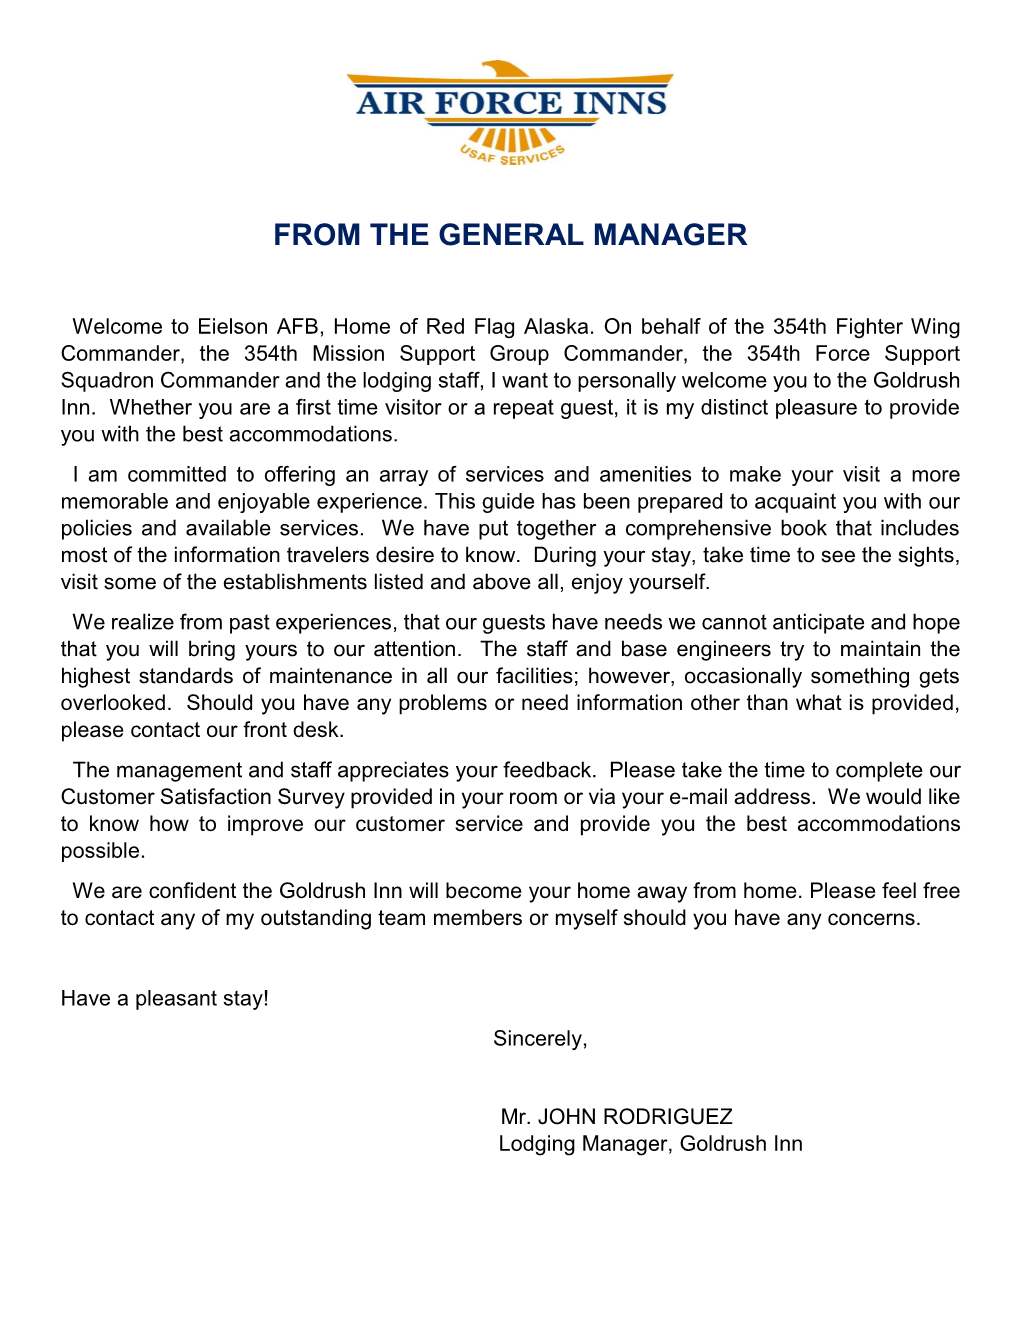 From the General Manager